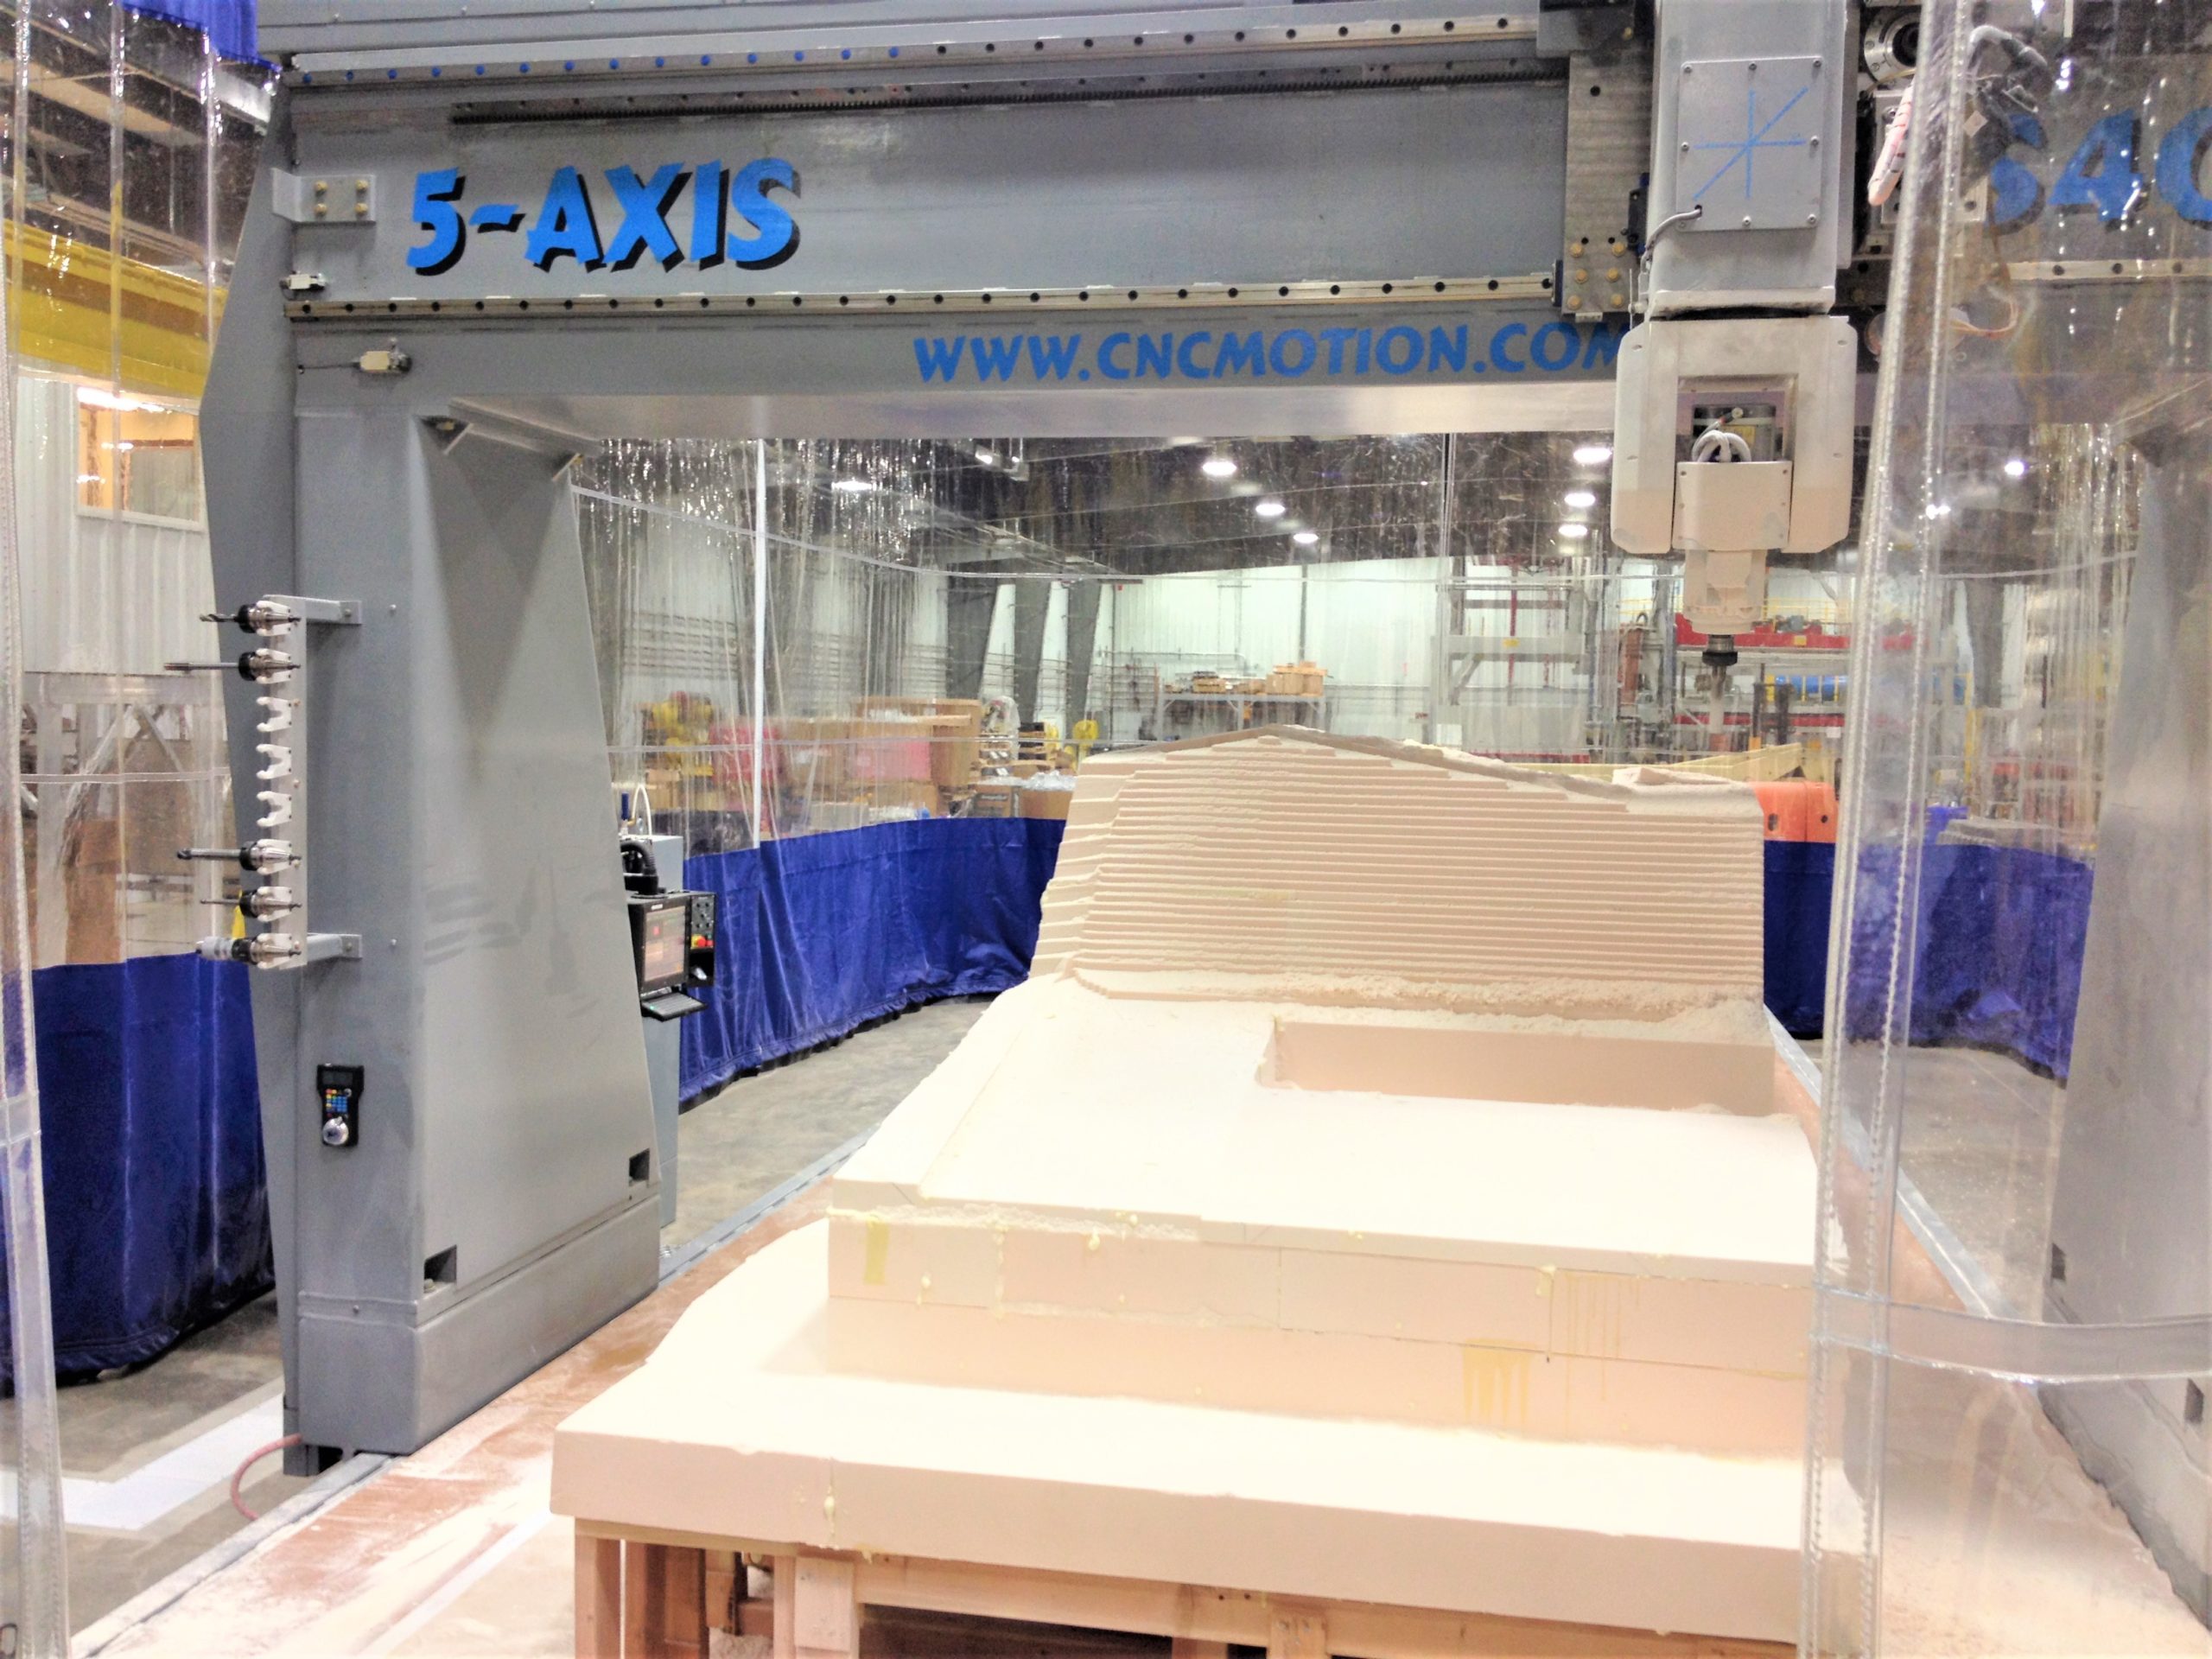 CNC Automotion 5-Axis Gantry Mill